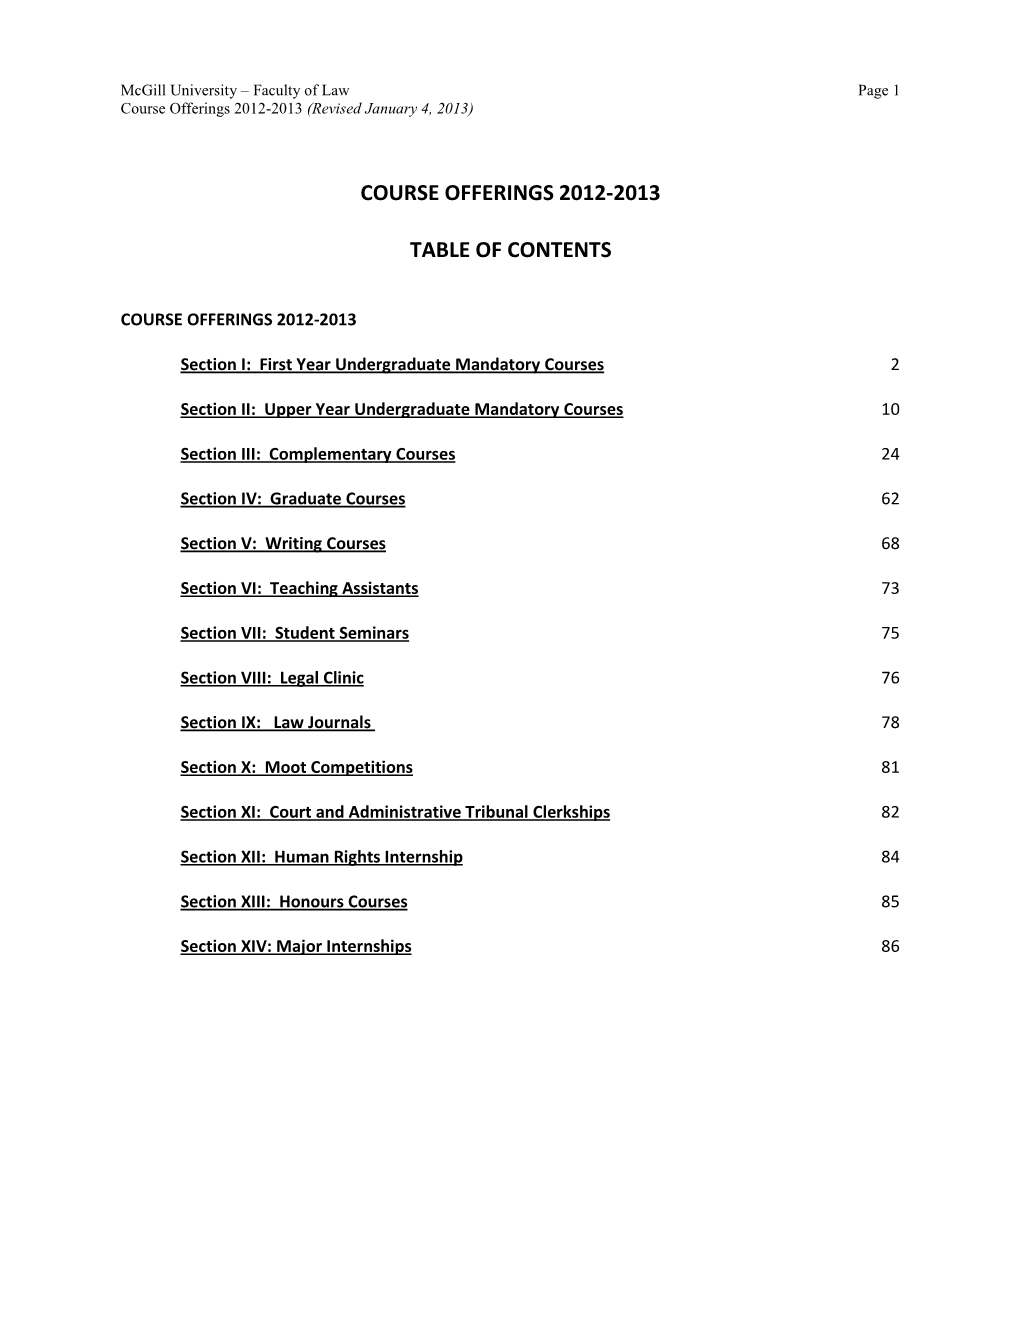 Course Offerings 2012-2013 Table Of